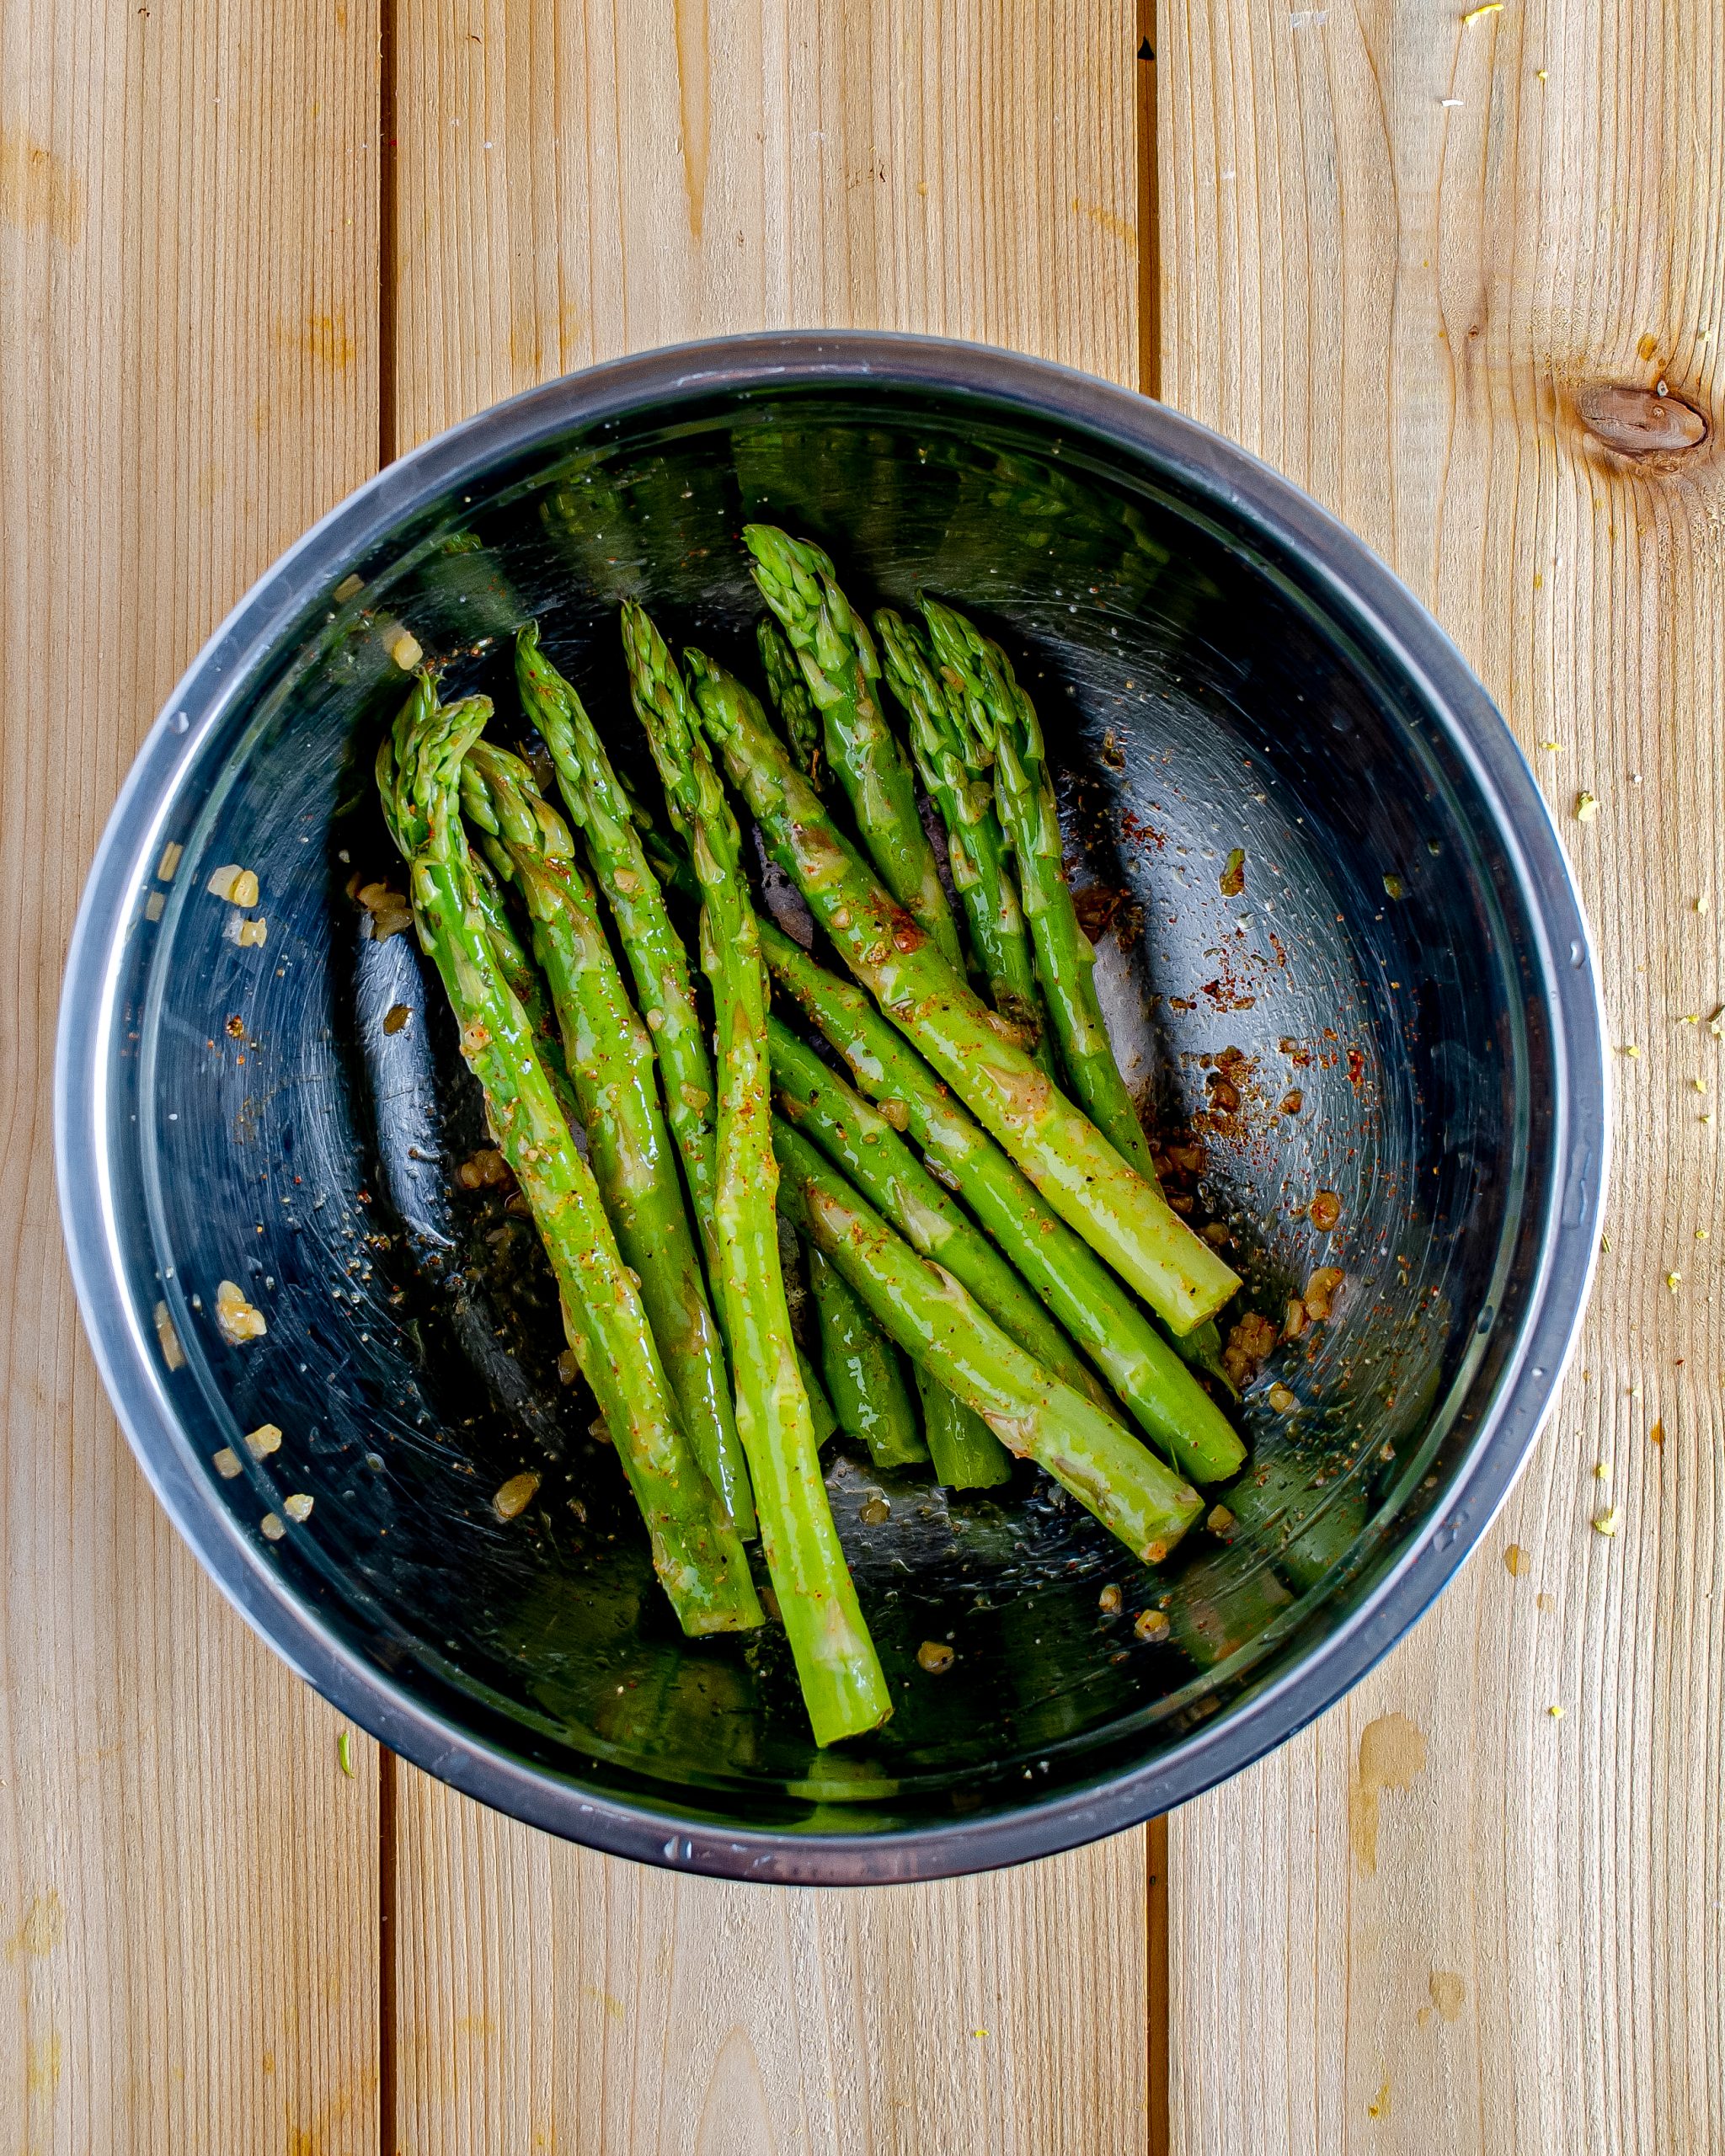 Mix together 1 Tbsp. olive oil, asparagus, garlic, and red pepper flakes in a bowl.